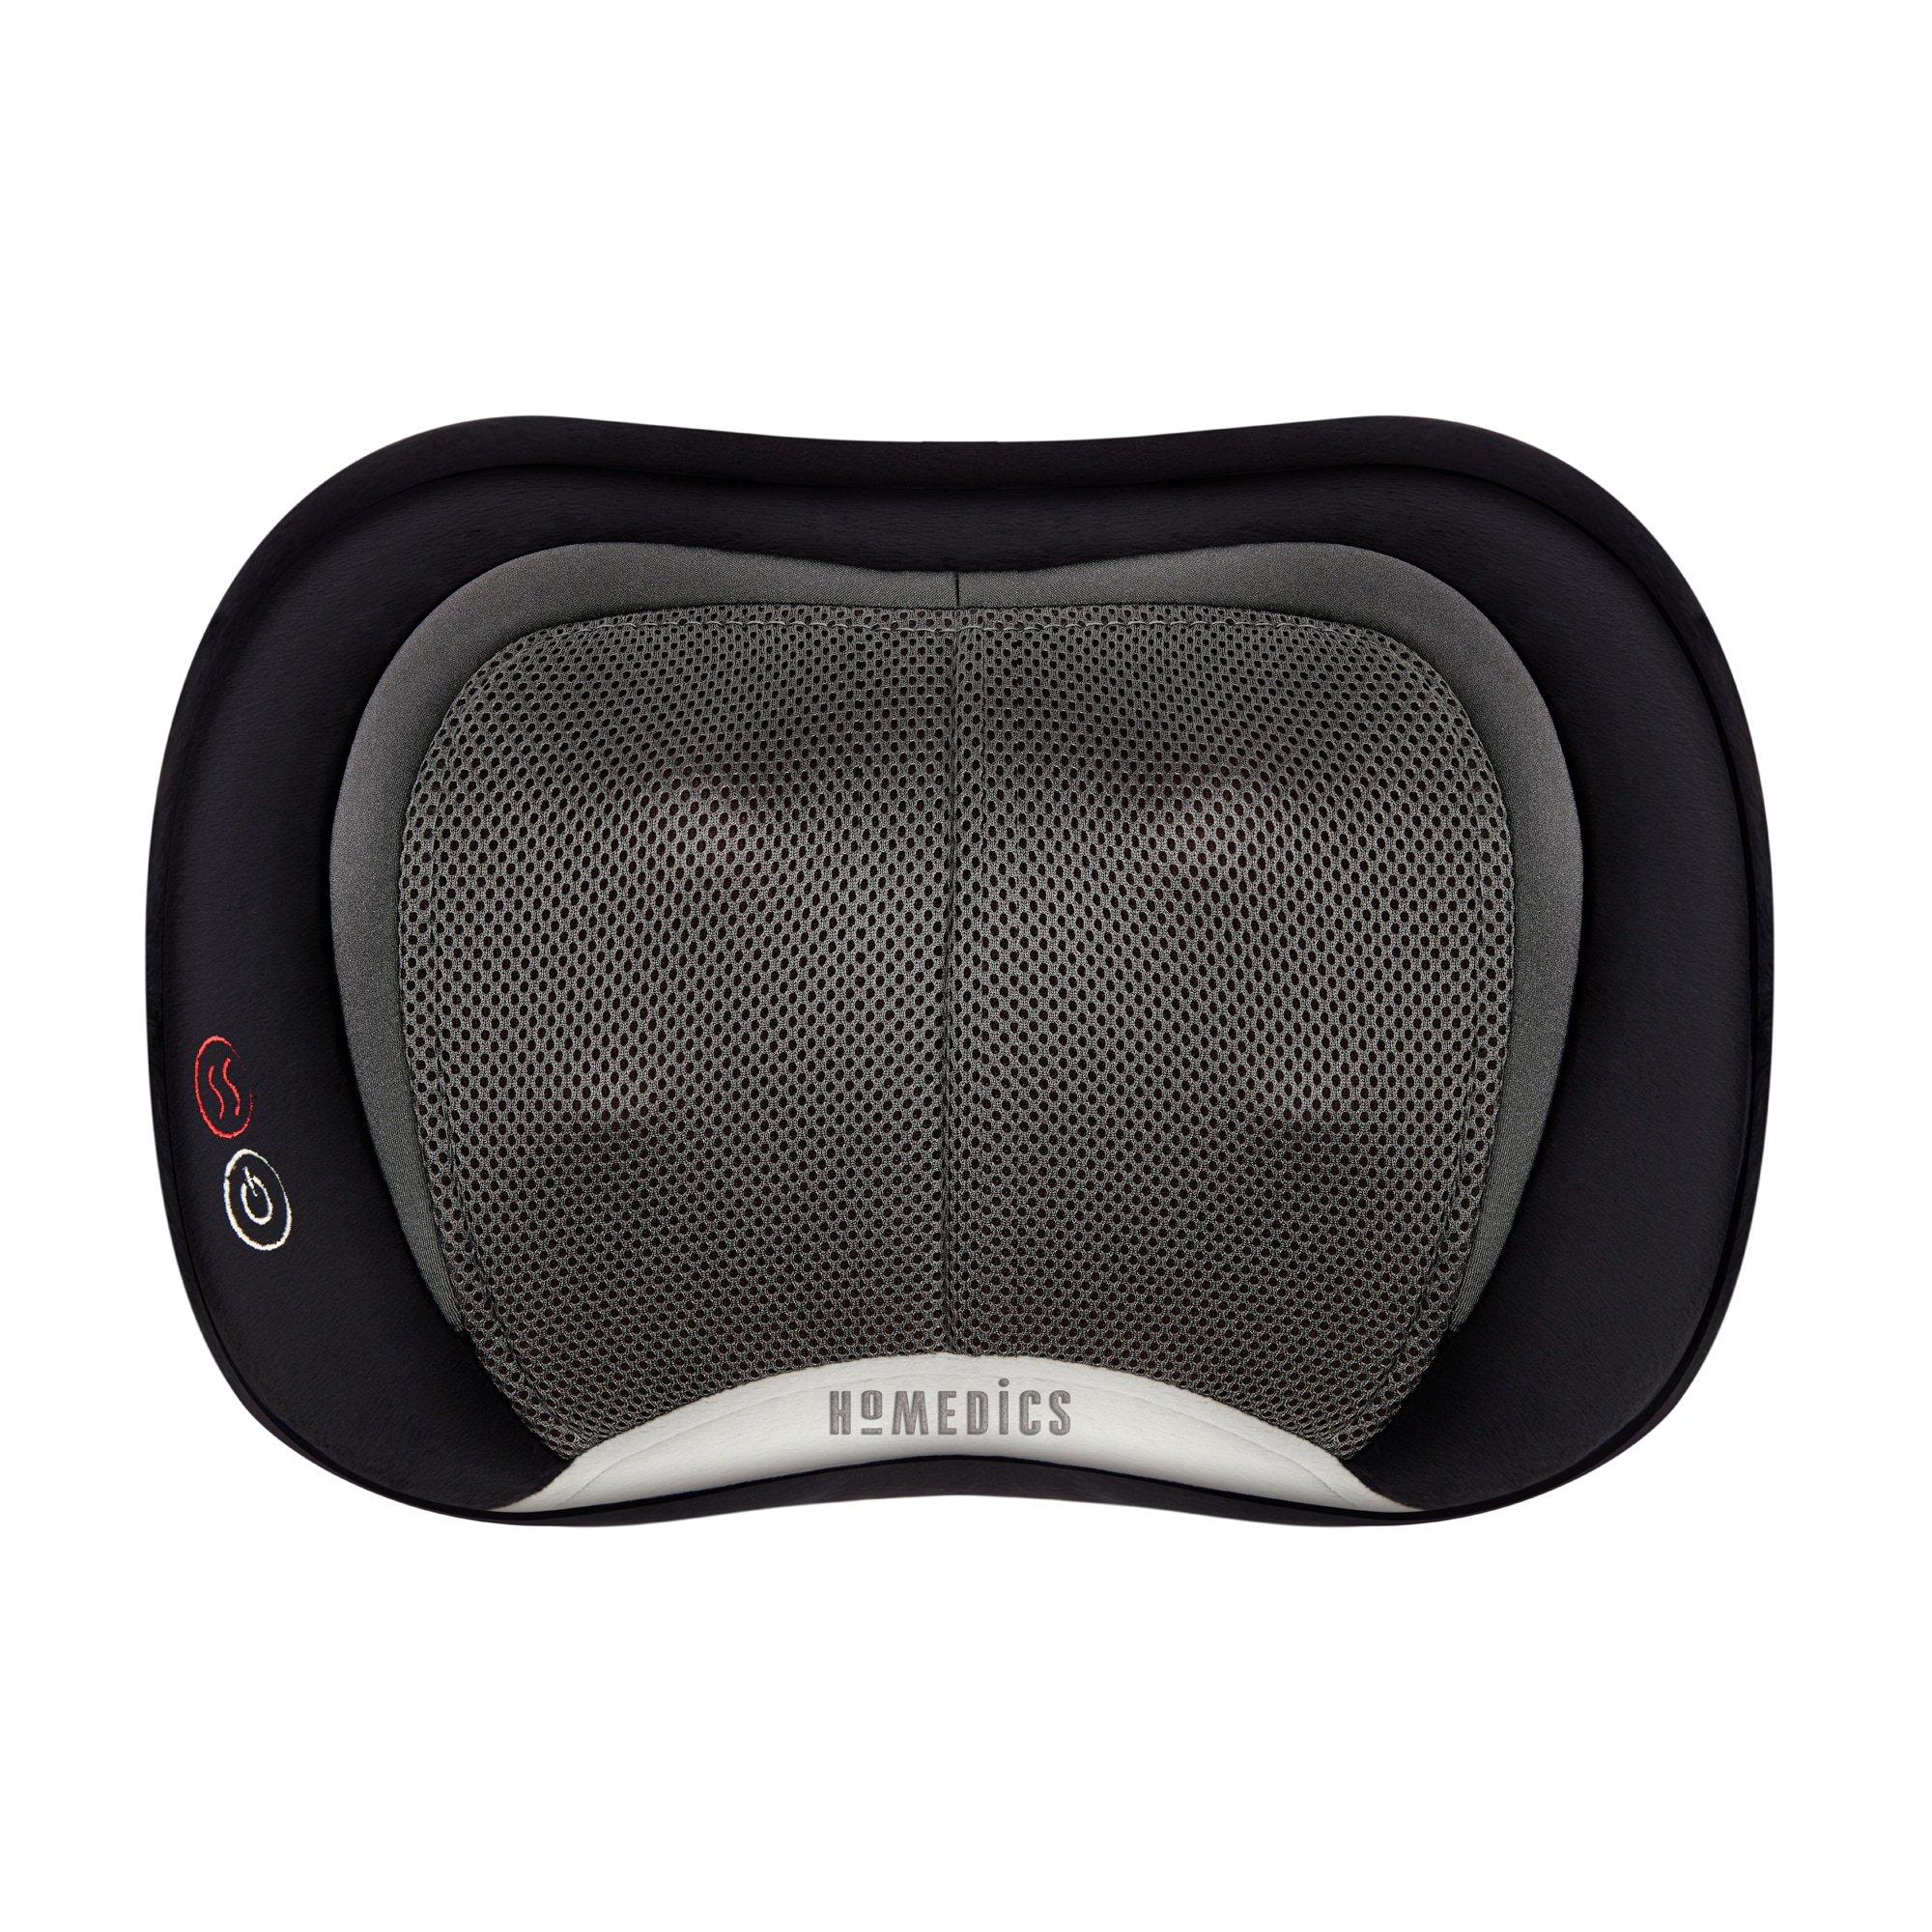 HOMEDICS Kneading and Vibration Cushion with Heat Plug-in Shiatsu Massager  in the Stretching & Recovery department at